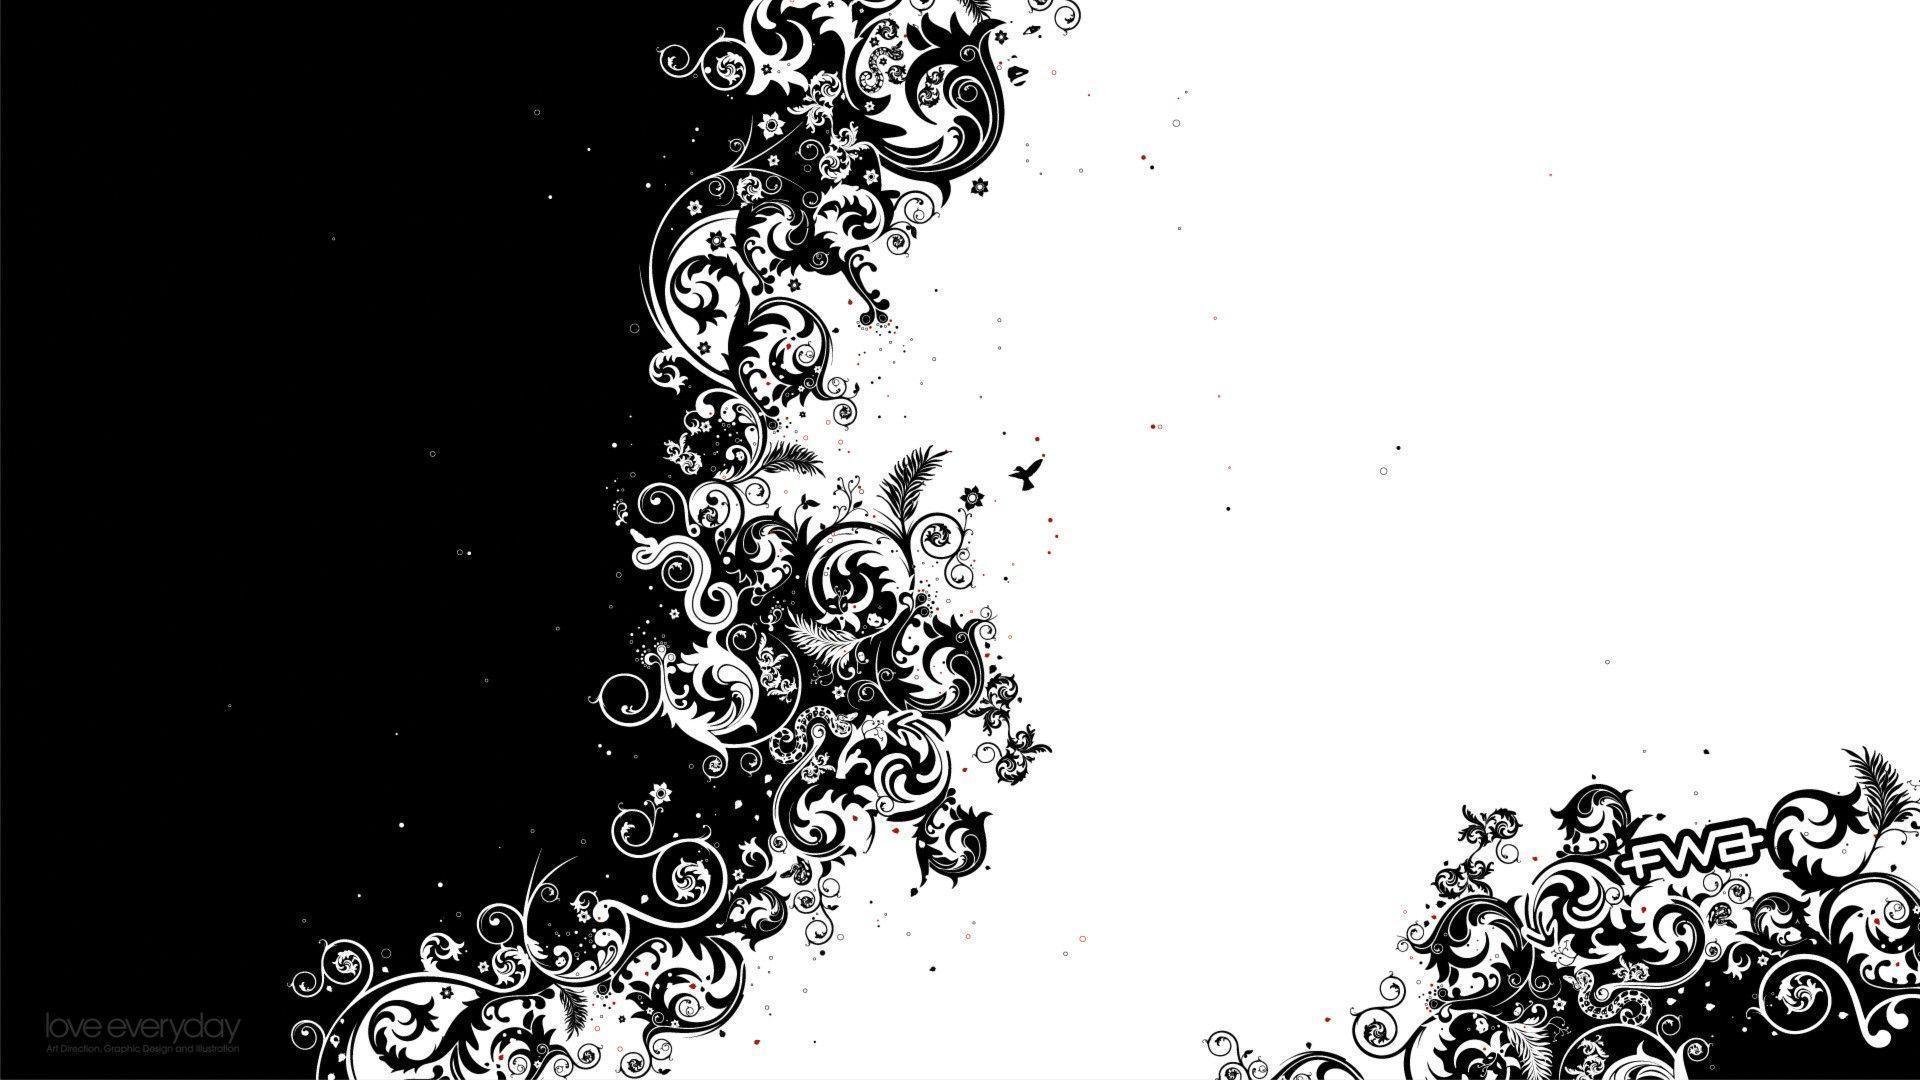 Cool Black And White Backgrounds